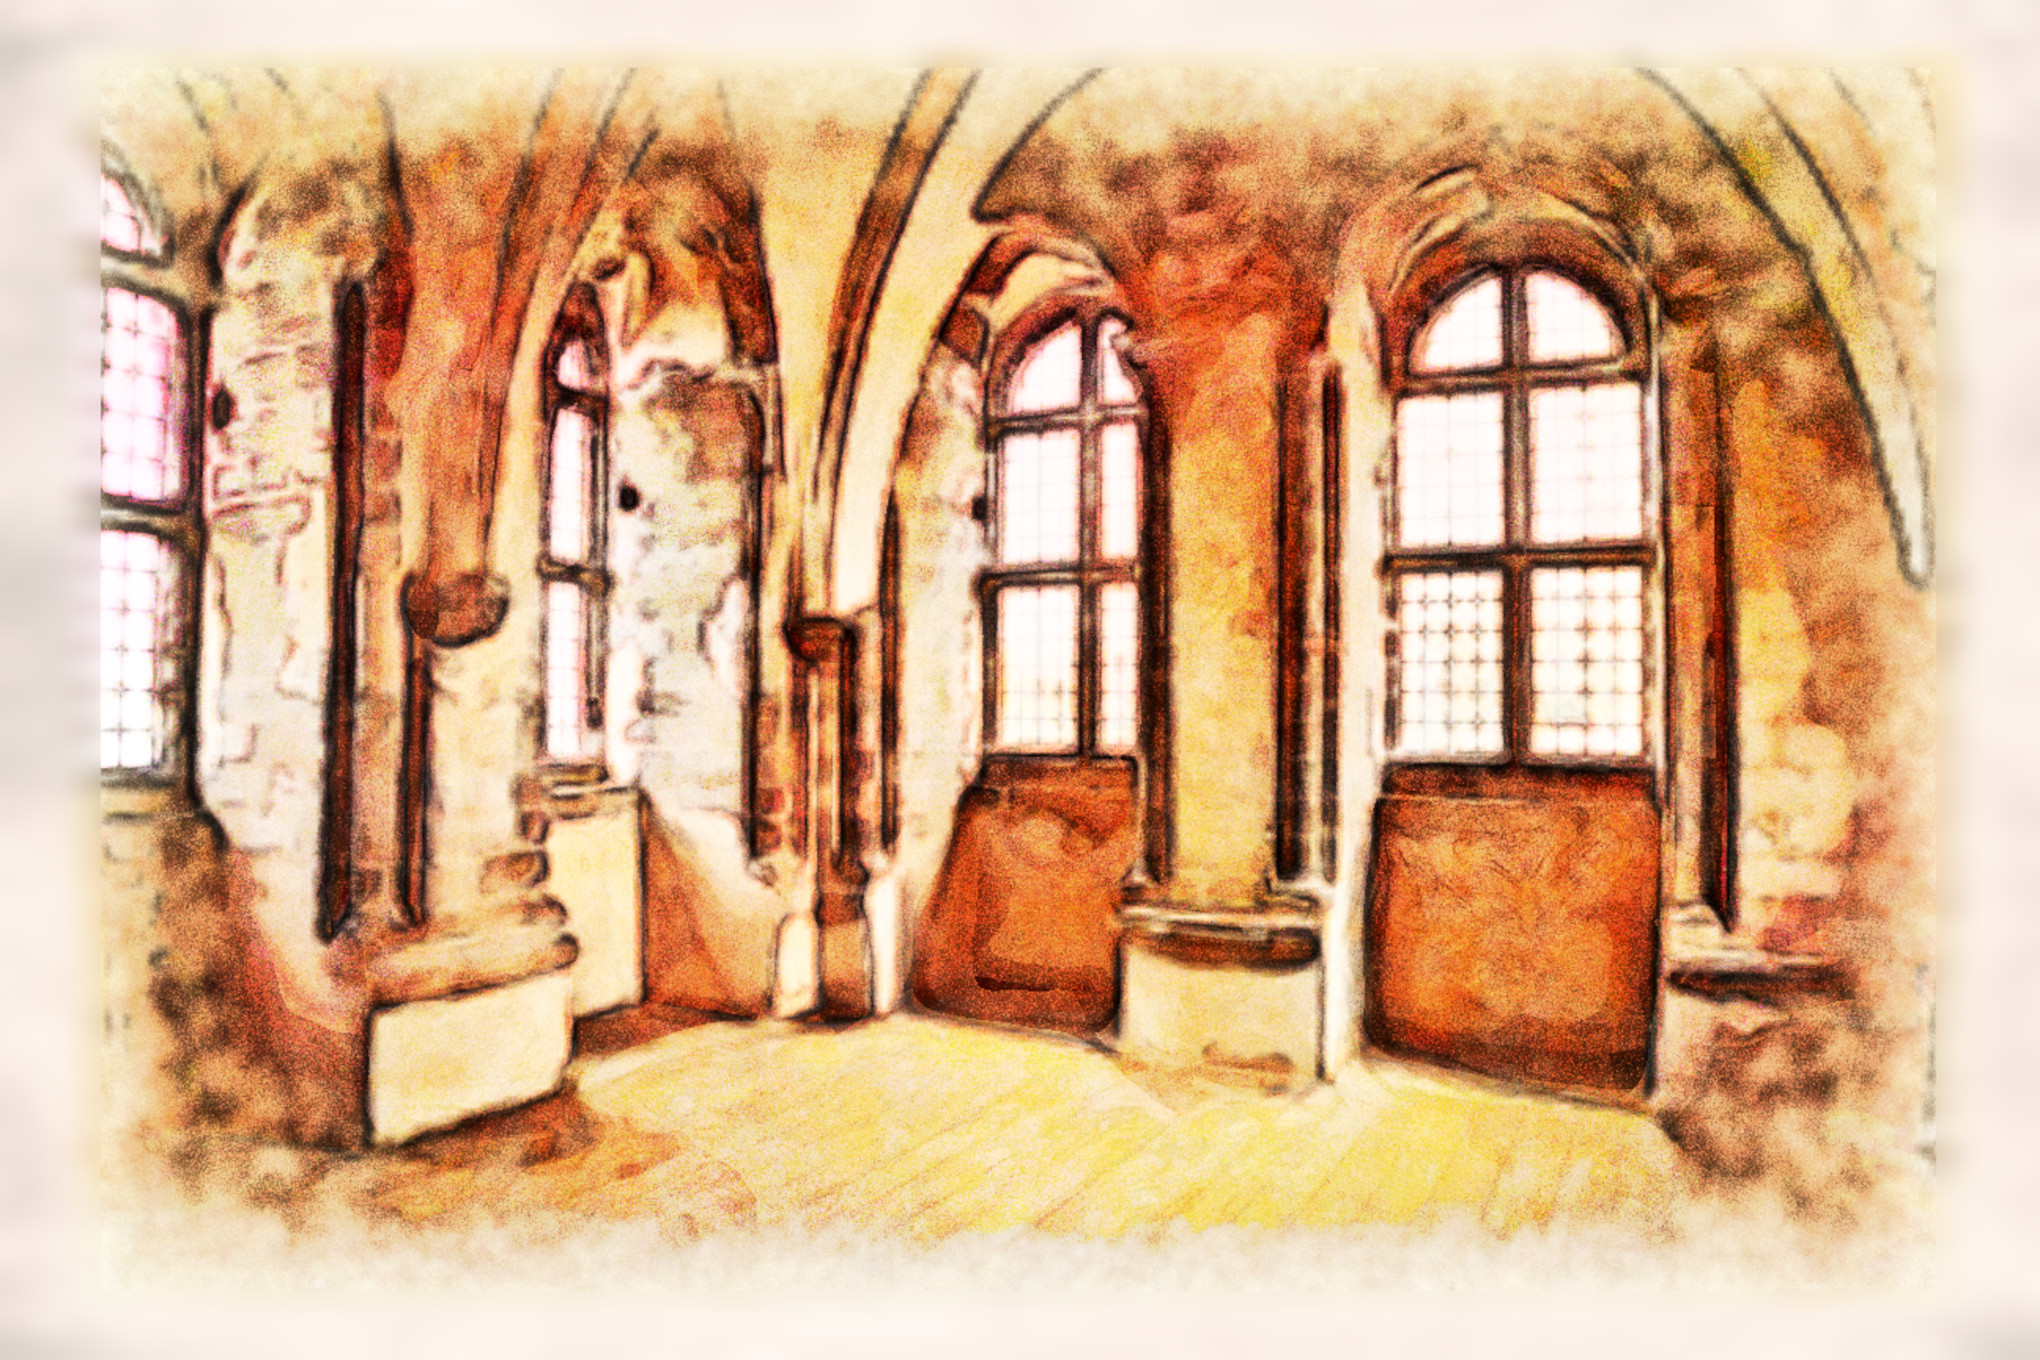 2023-09-30 18-18-11 gothic_castle_room_by_nickistock_d2gw2uk with a Watercolor Pastels Effect 2023 (4.0,75.0,32.0,50.0,10.0,8.0,75.0,True,0).jpg